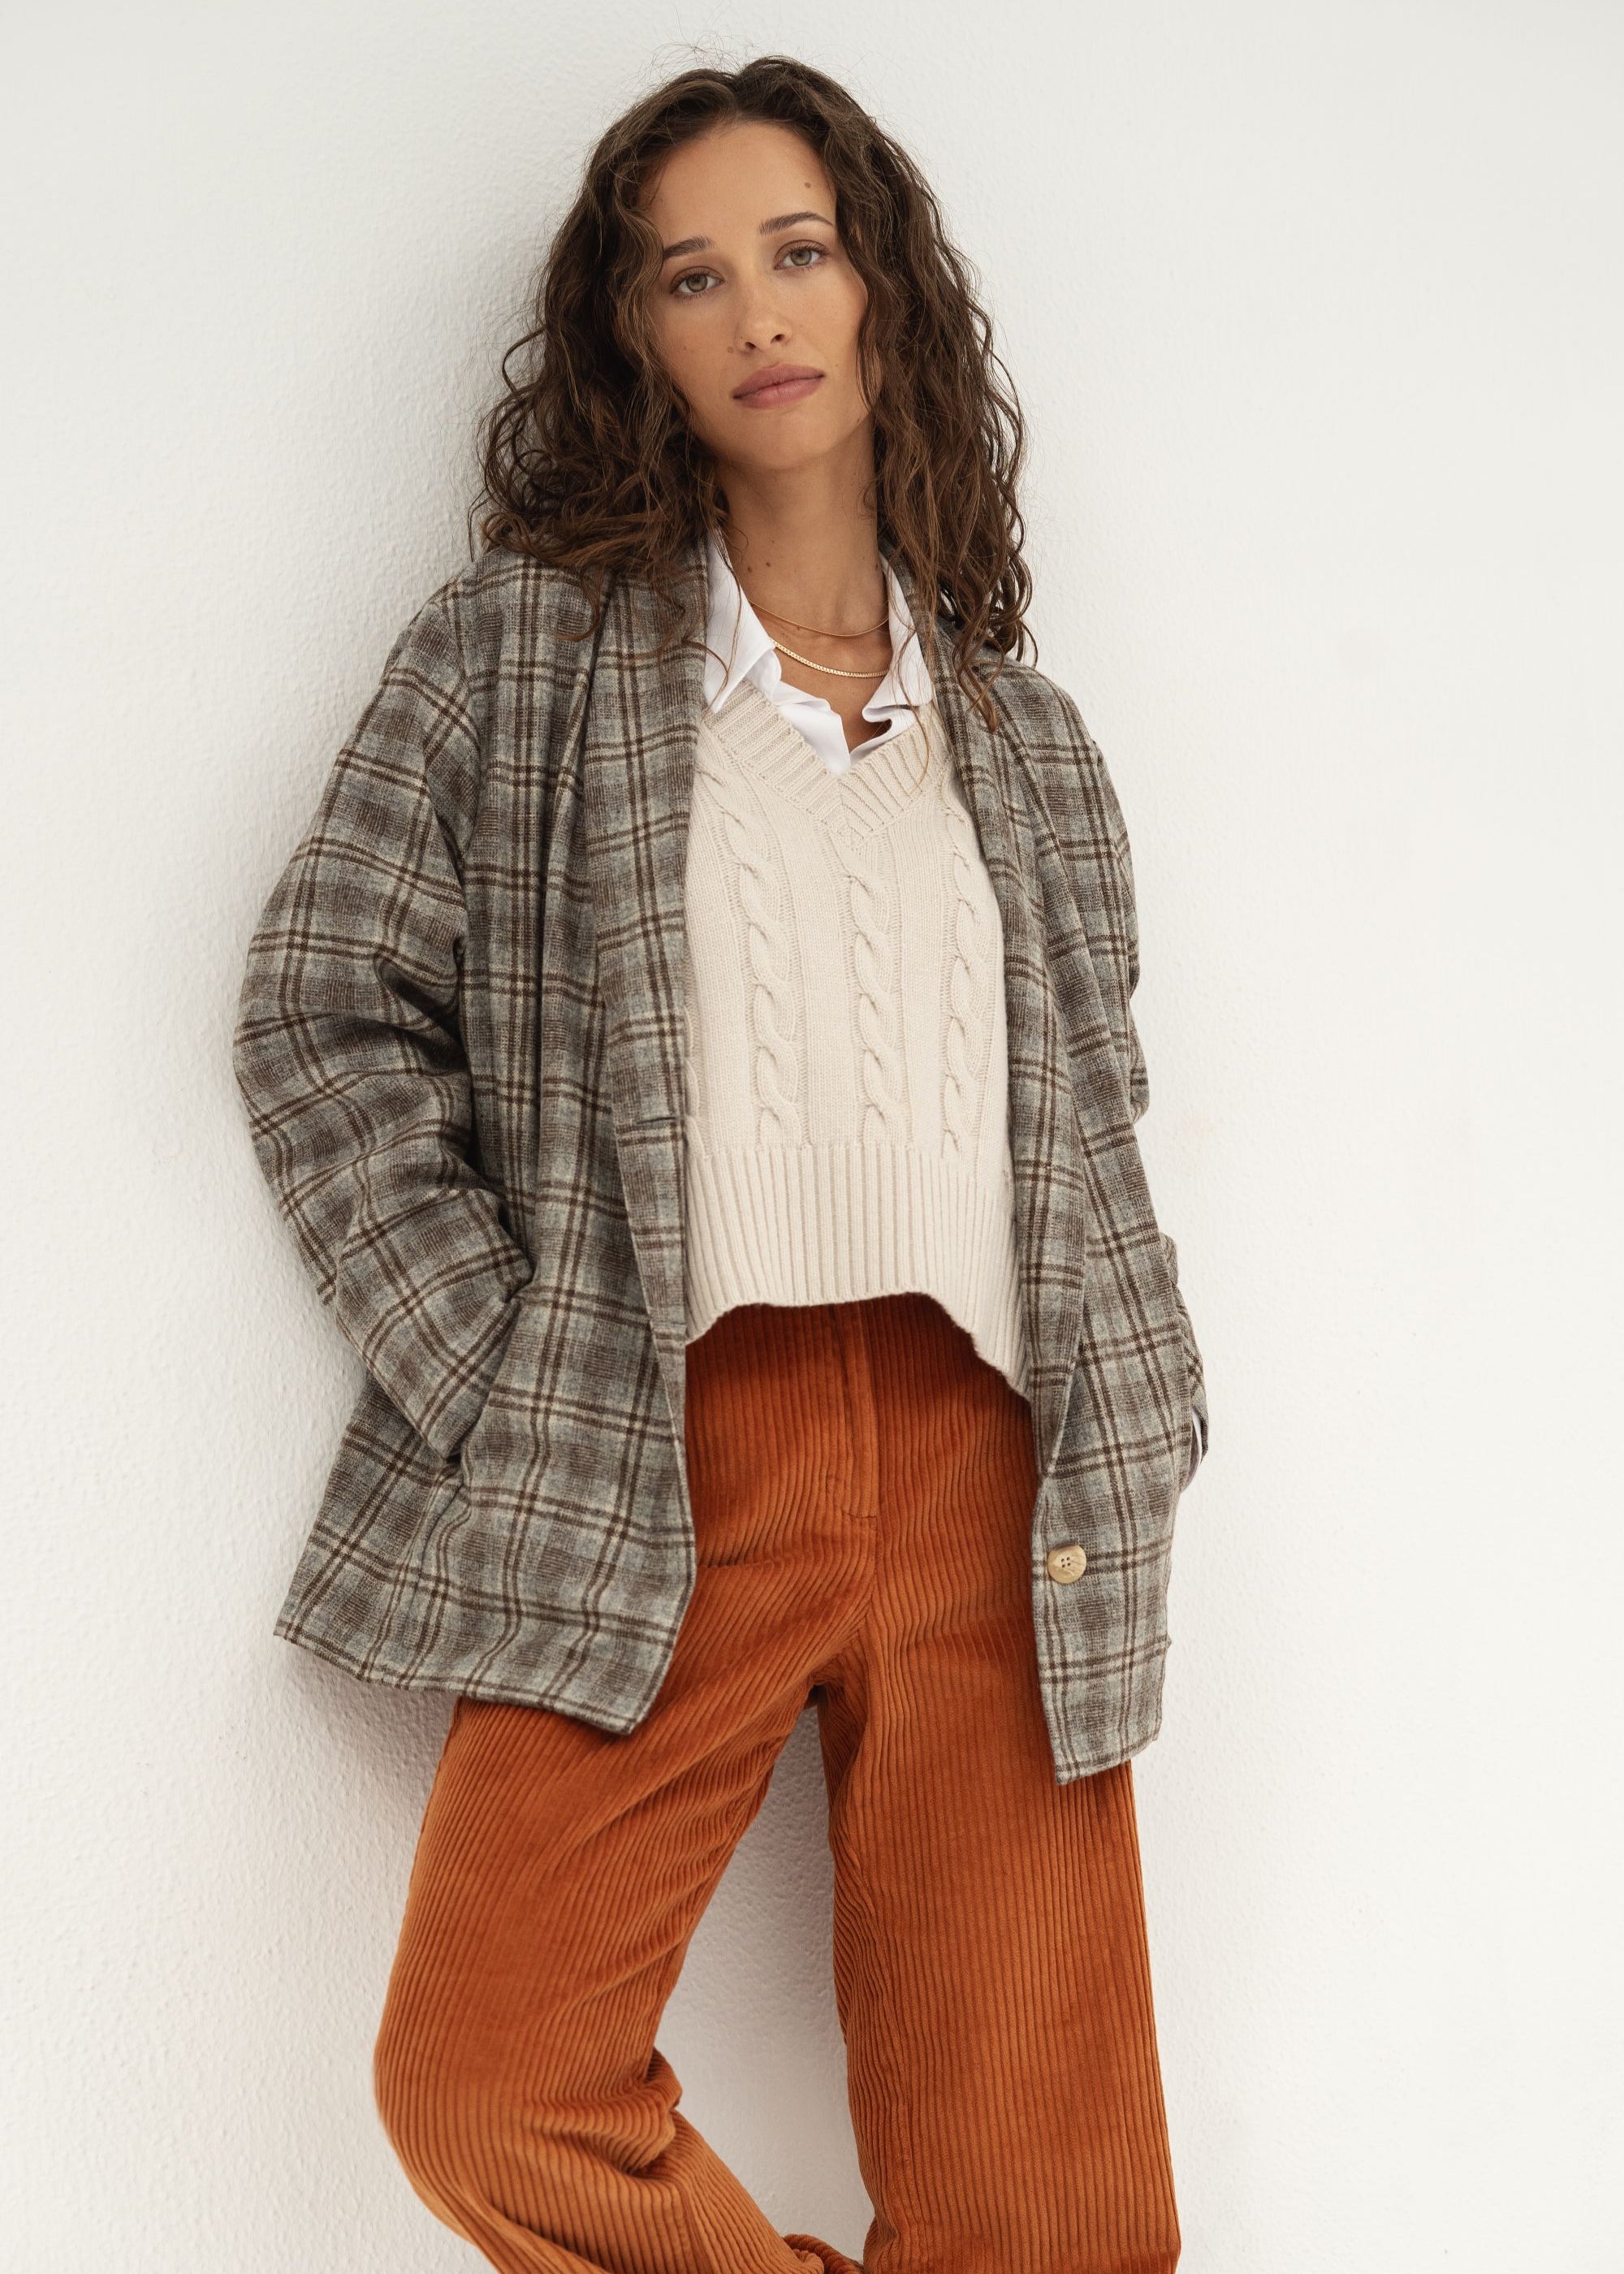 Naz women's checkered winter coat in grey. Features a relaxed regular fit. Made in Portugal.